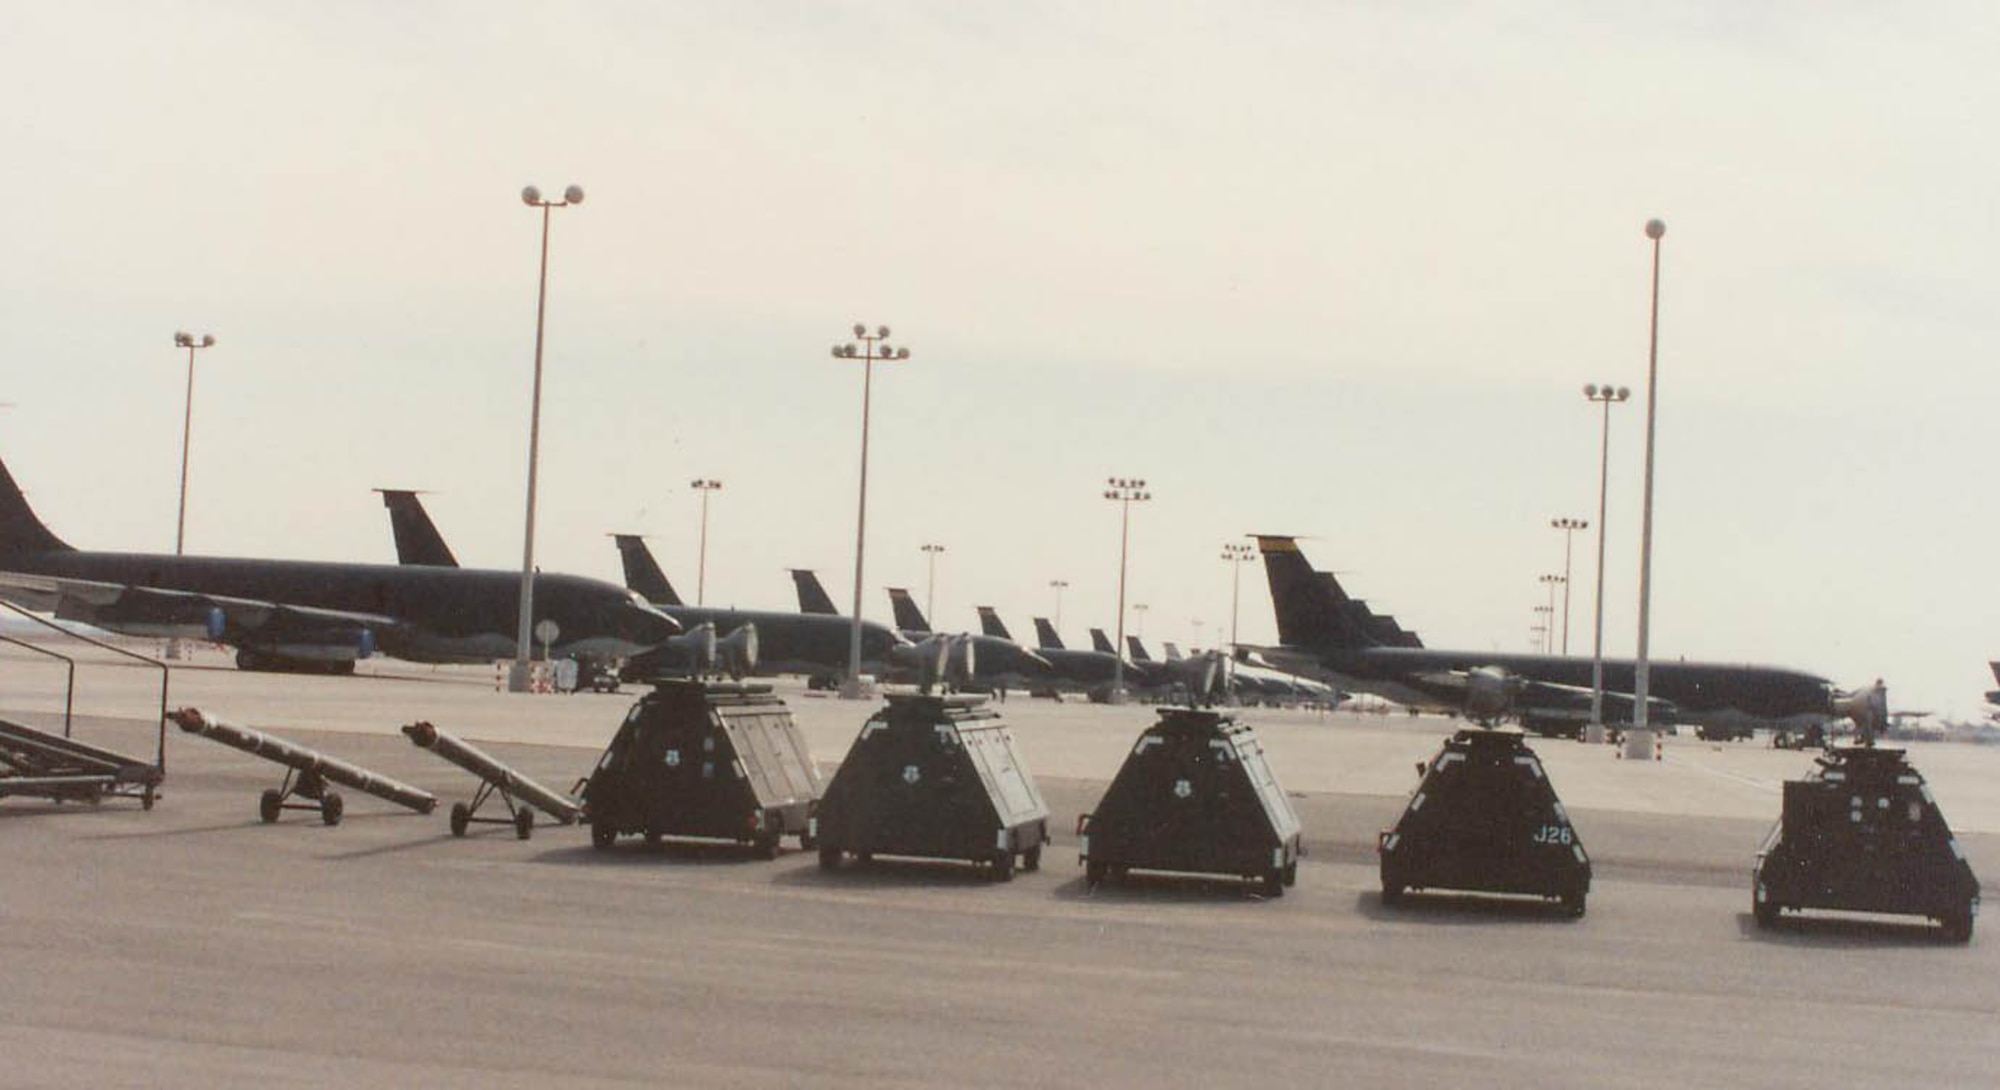 KC-135s parked at Prince Abdullah Air Base. During the build up to Operation Desert Storm multiple units would participate in the refueling operations in Jeddah.